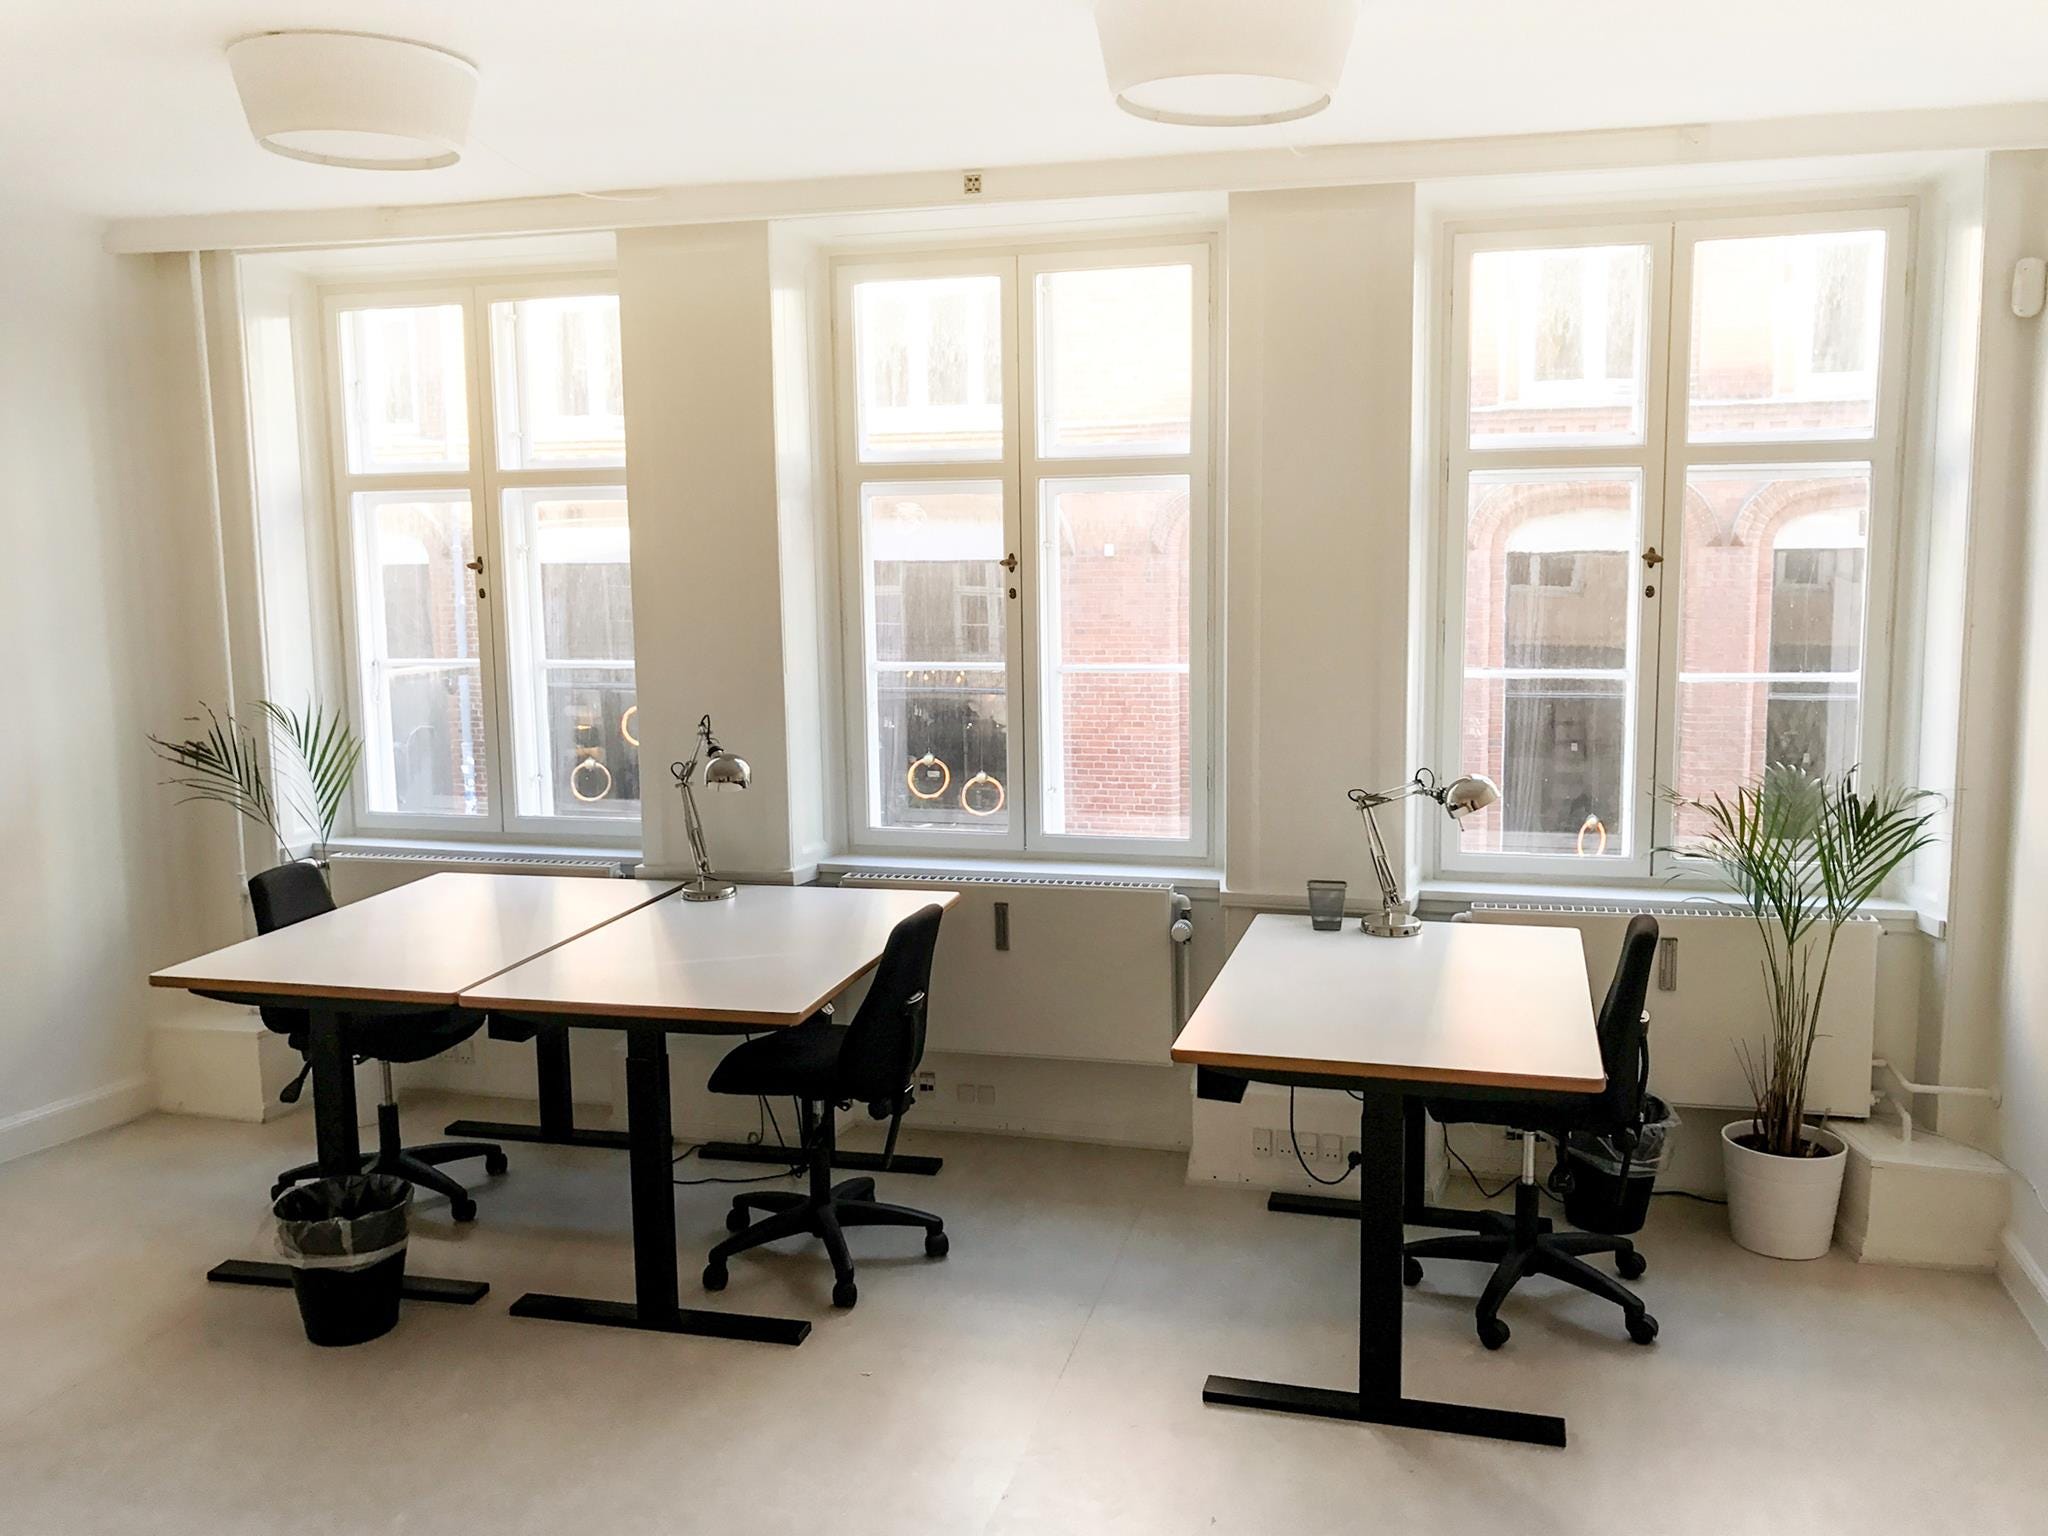 Will you be our new studio-mates in Copenhagen? | by Michael Flarup | Medium